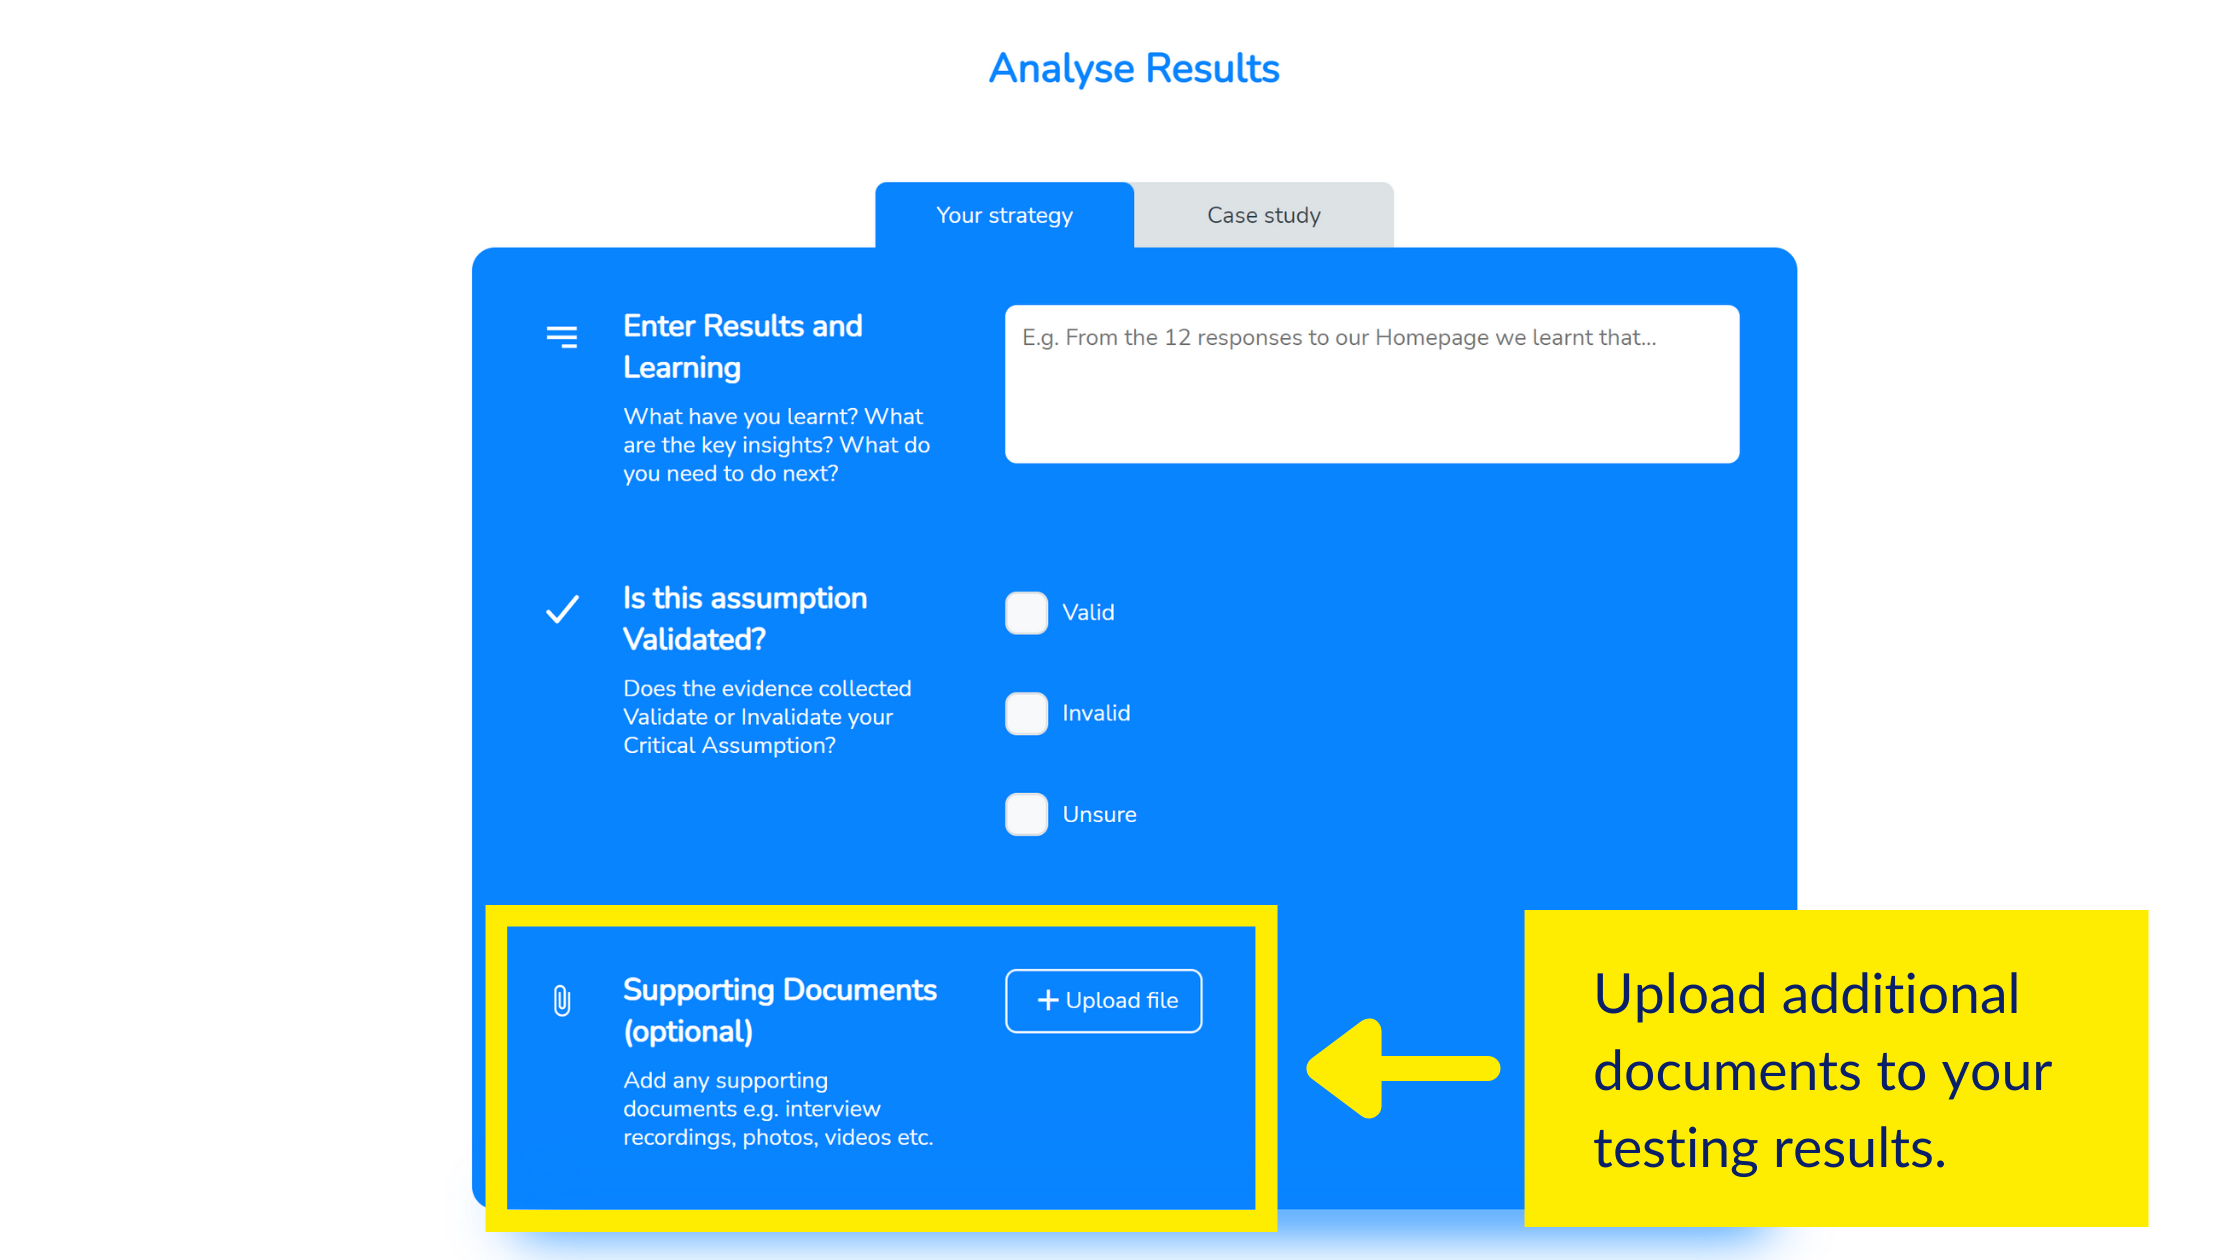 Latest updates to SimVenture Validate: Upload documents to your business idea testing results